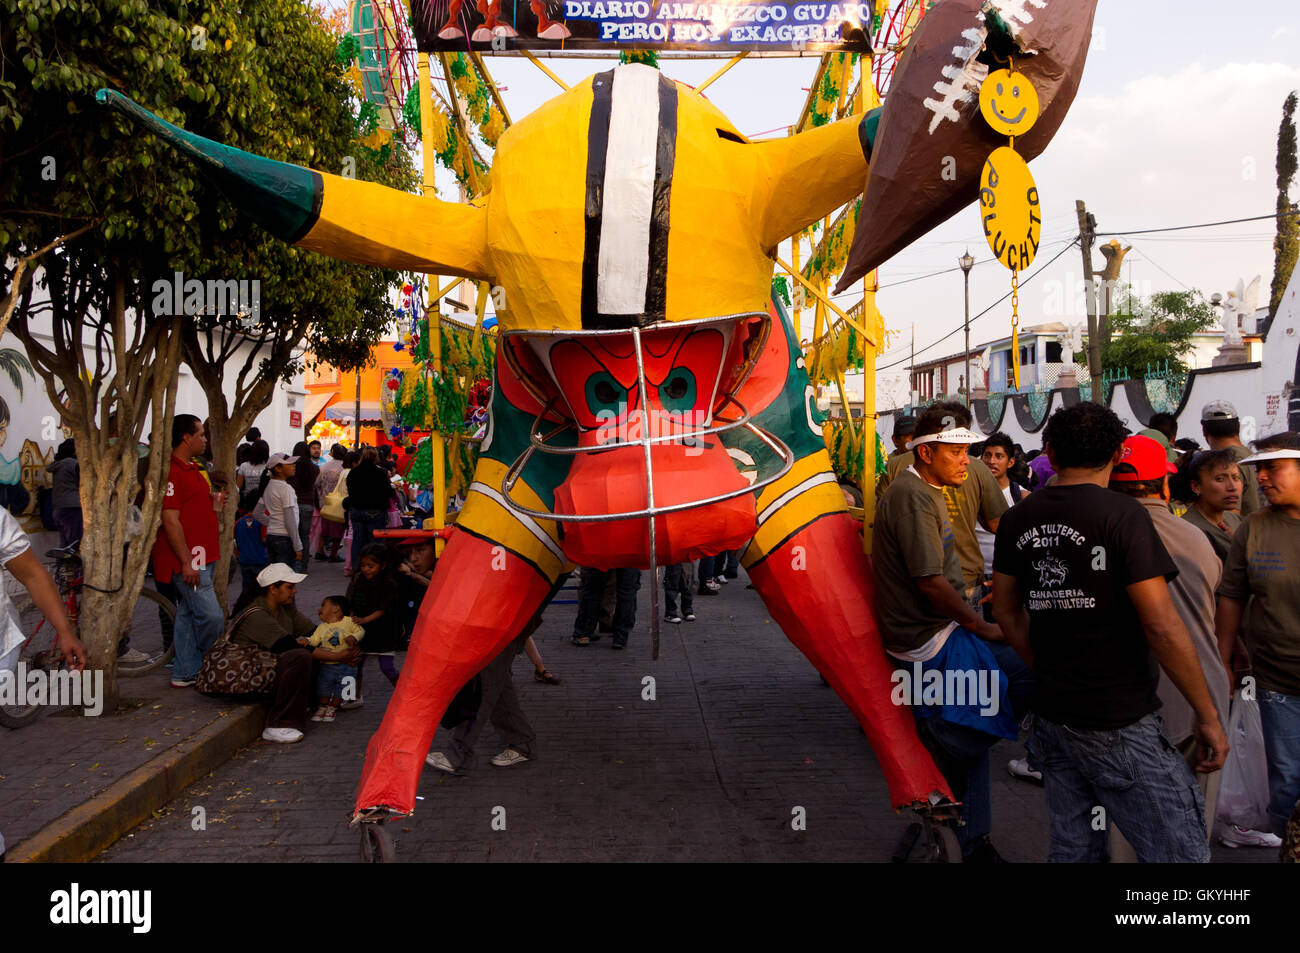 Giant cardboard bull (torito) with fireworks parading during the National Pyrotechnic Festival in Tultepec, Mexico Stock Photo